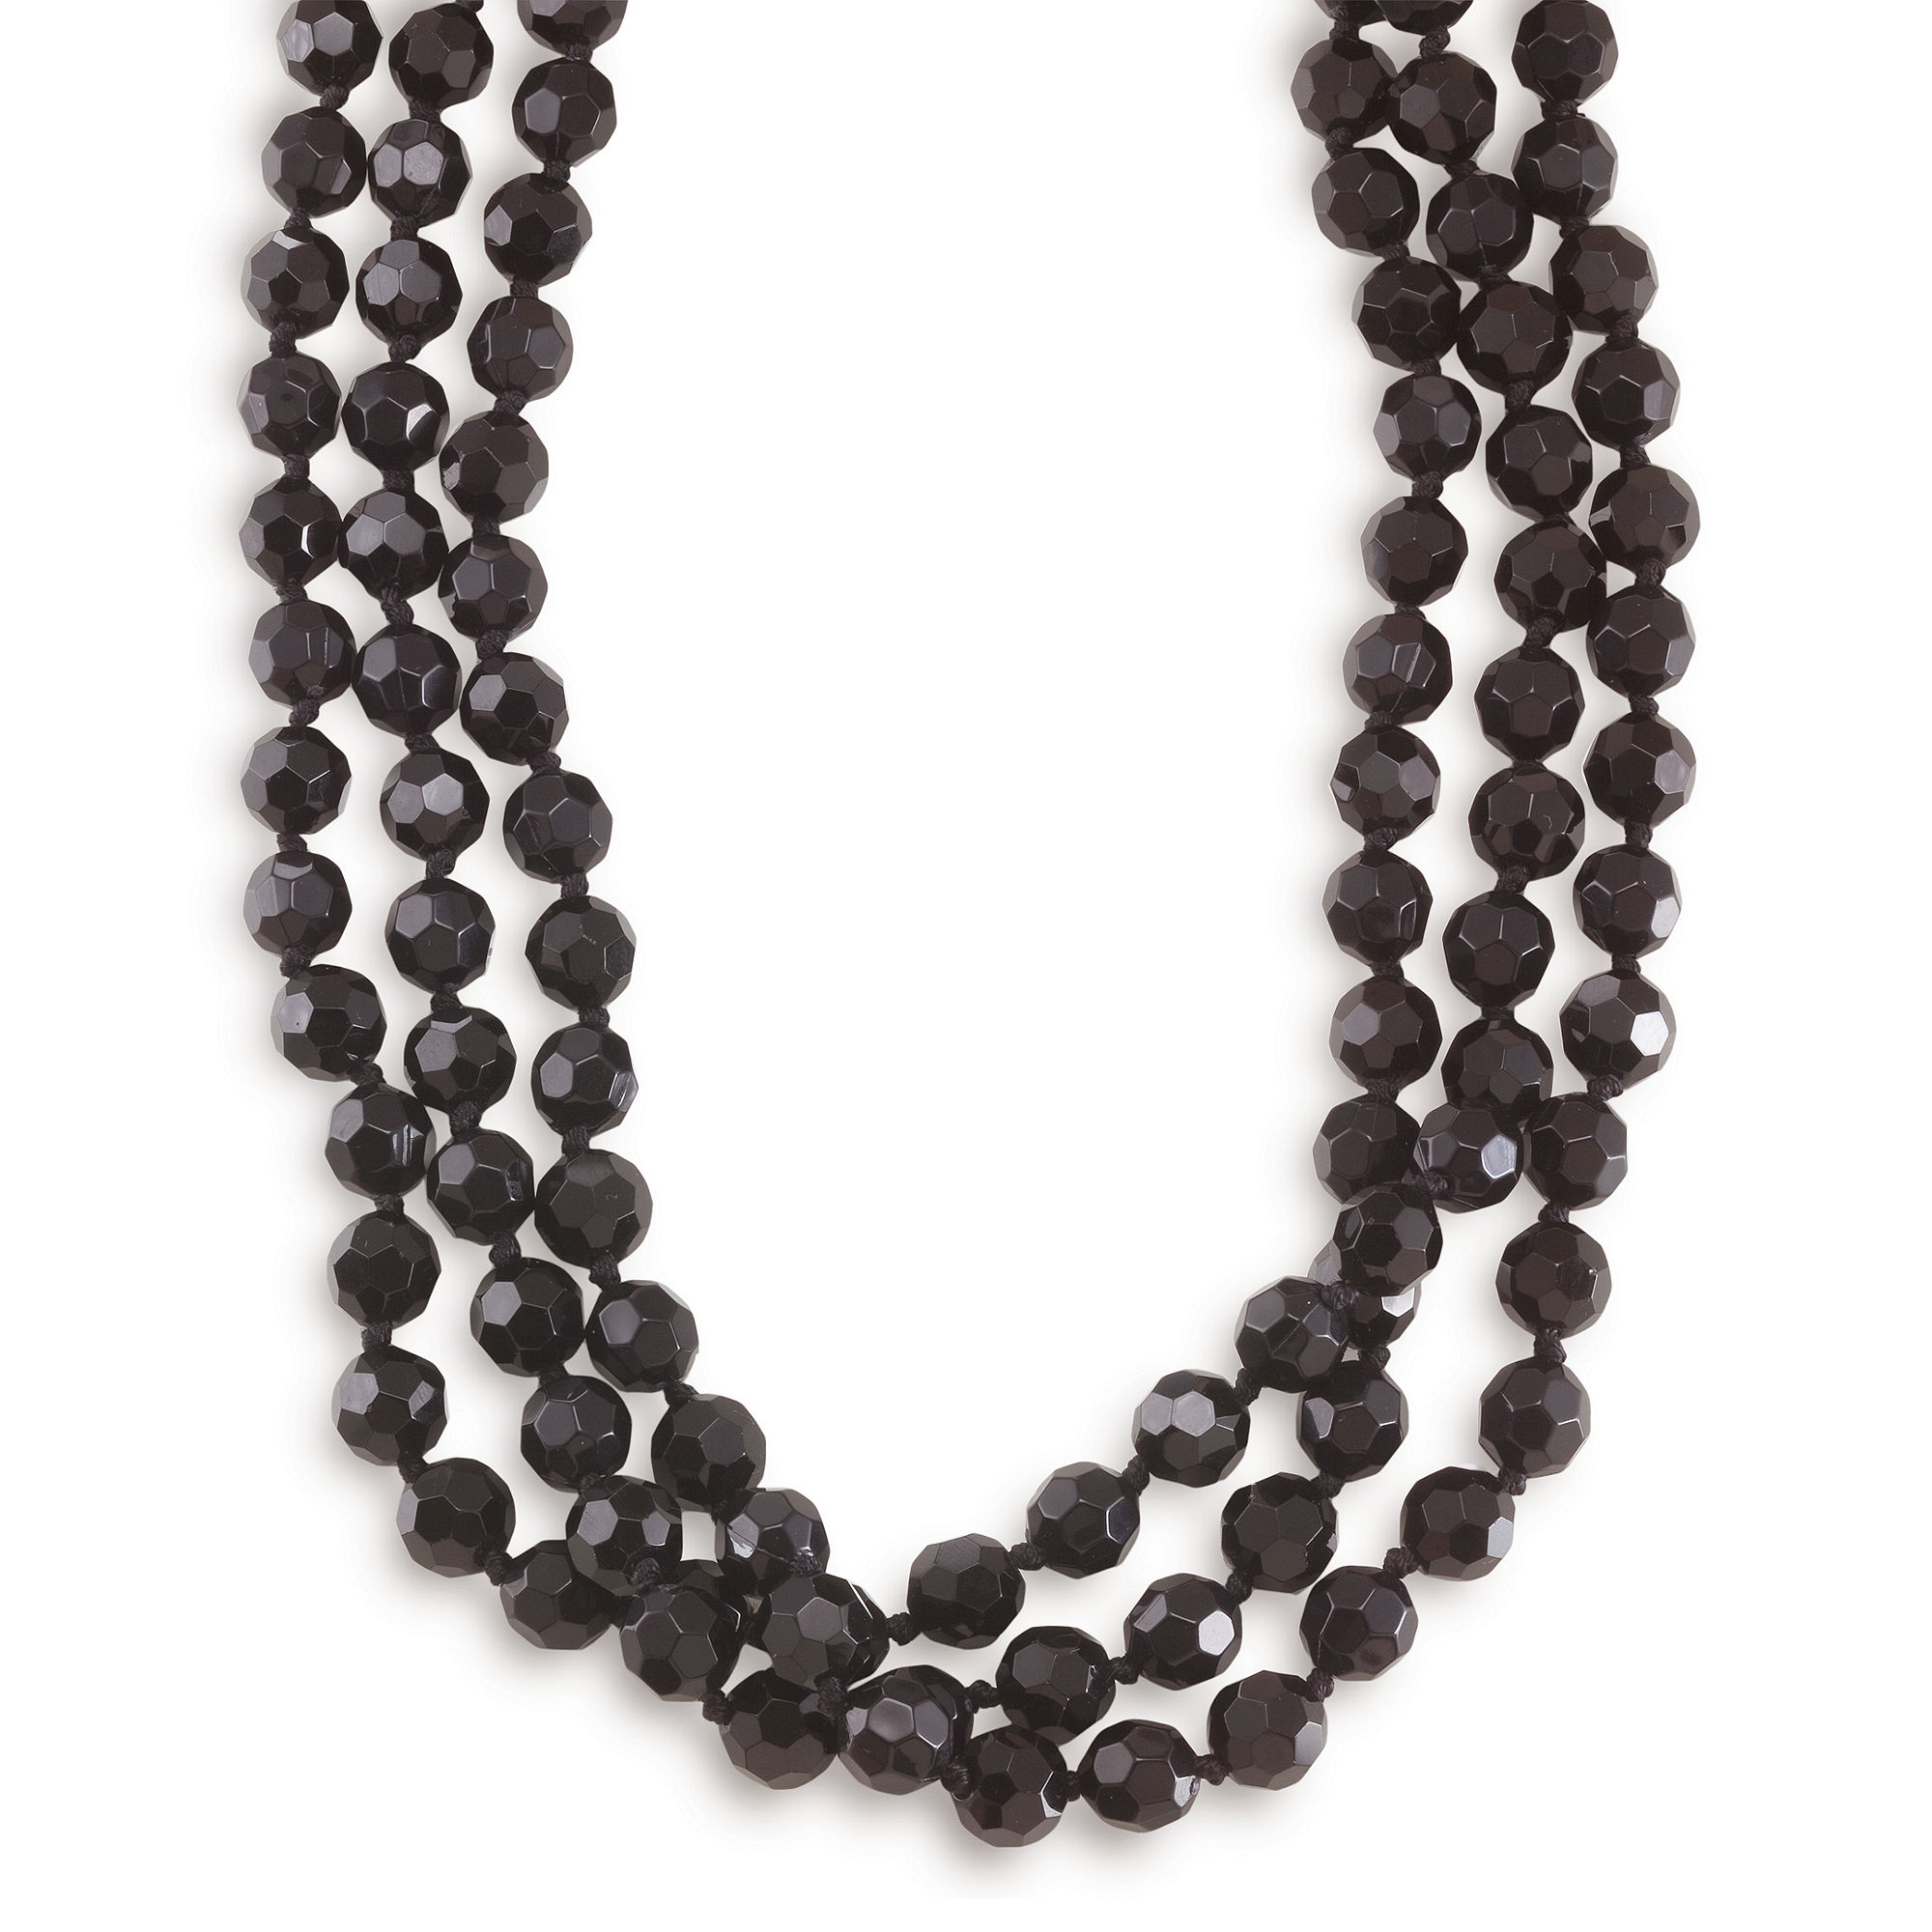 Lyst - Carolee Necklace, Jet Bead Long Rope in Black